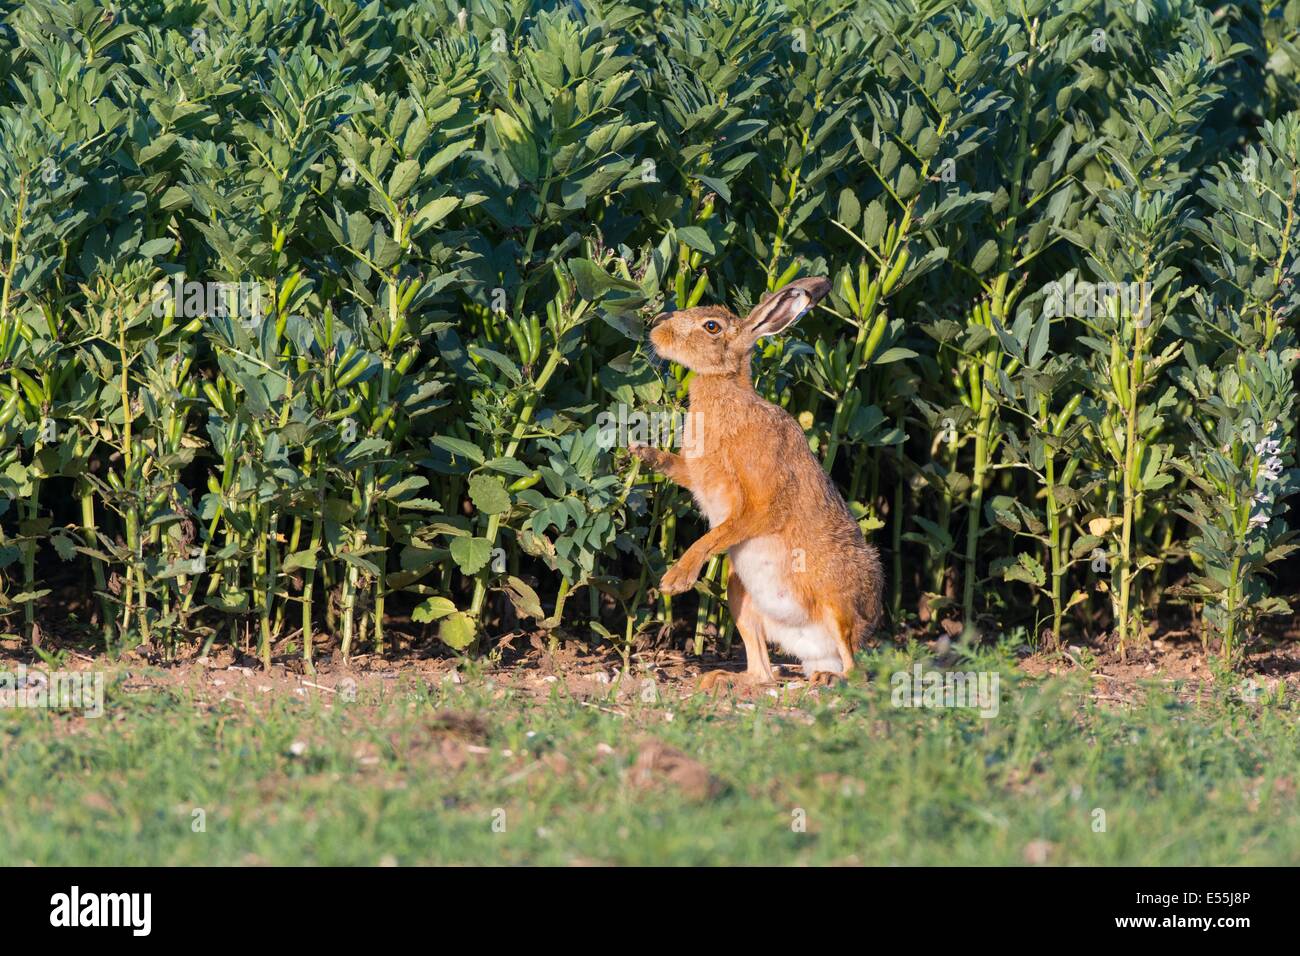 European hare (Lepus europaeus), brown hare, adult feeding on field crop of broad beans, England, July. Stock Photo